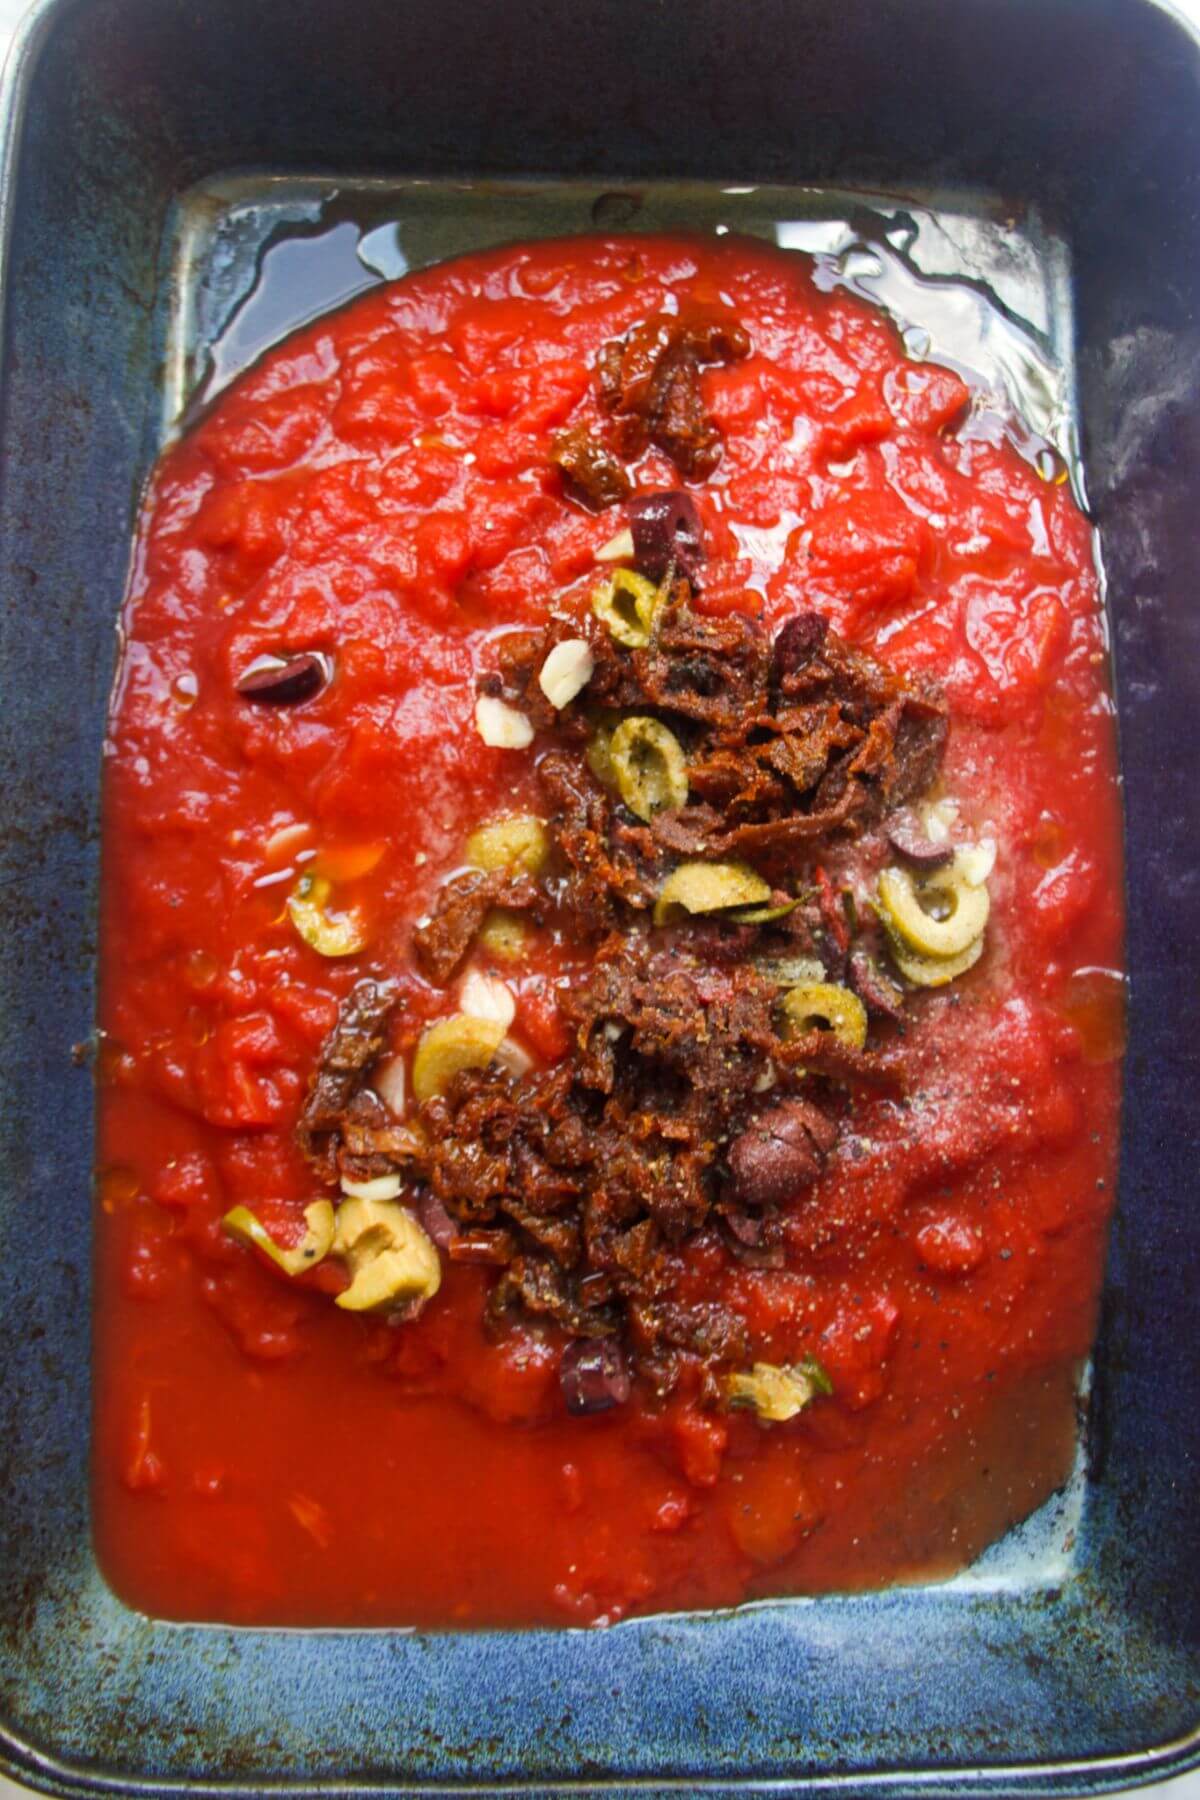 Crushed tomatoes, olives and sundried tomatoes in the middle of a large blue oven dish.